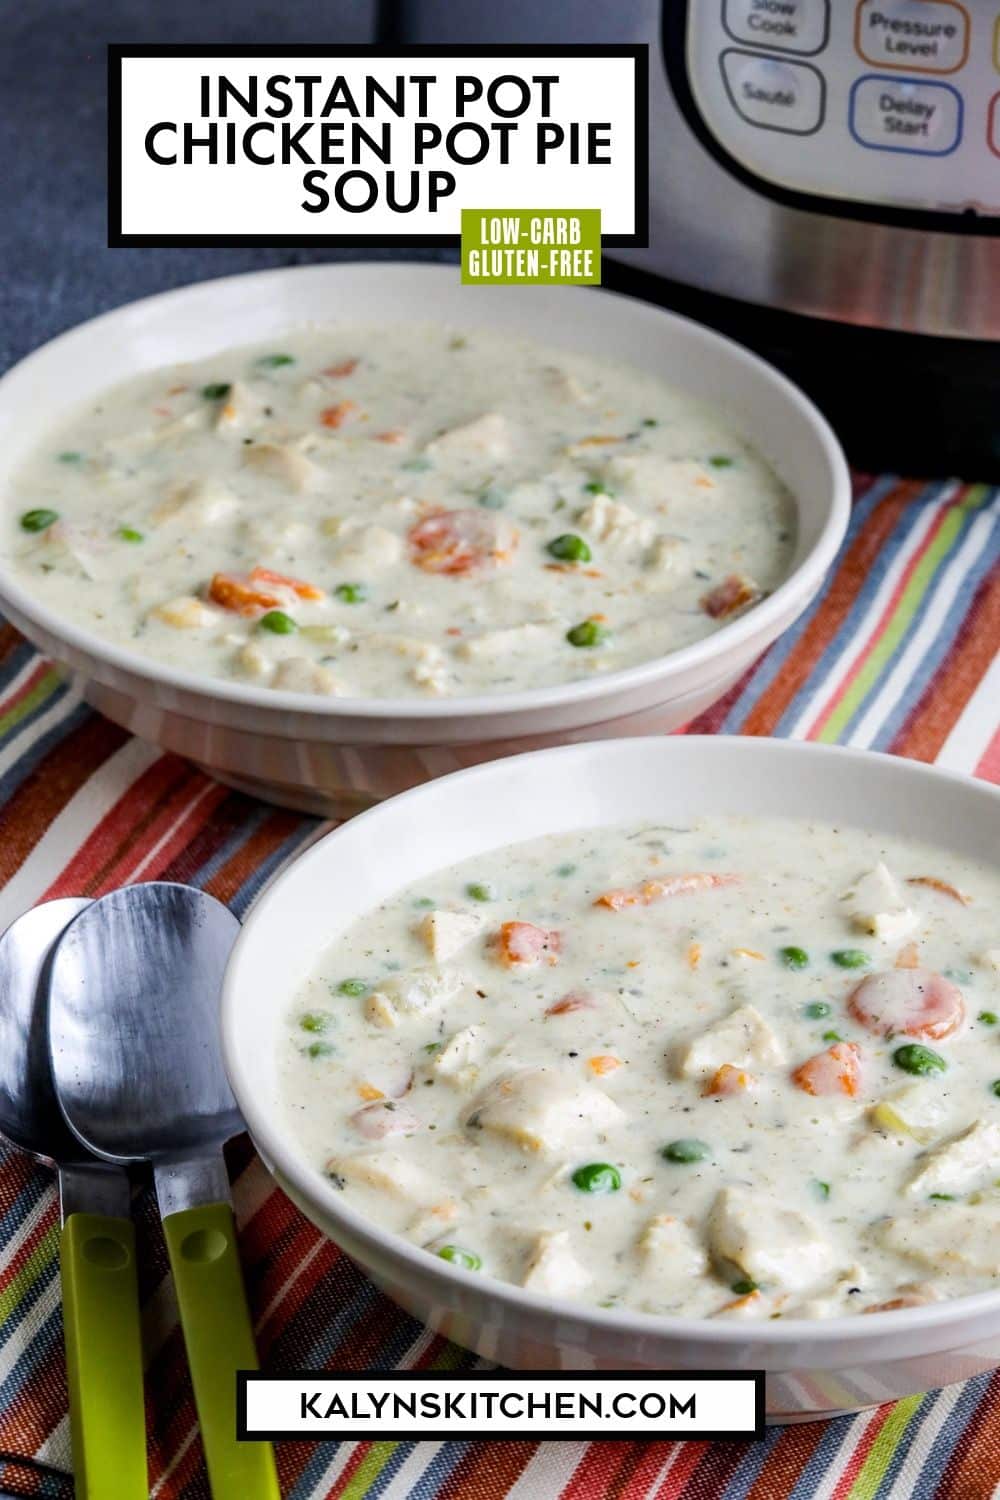 Pinterest image for Instant Pot Chicken Pot Pie Soup shown in two bowls with Instant Pot in back.